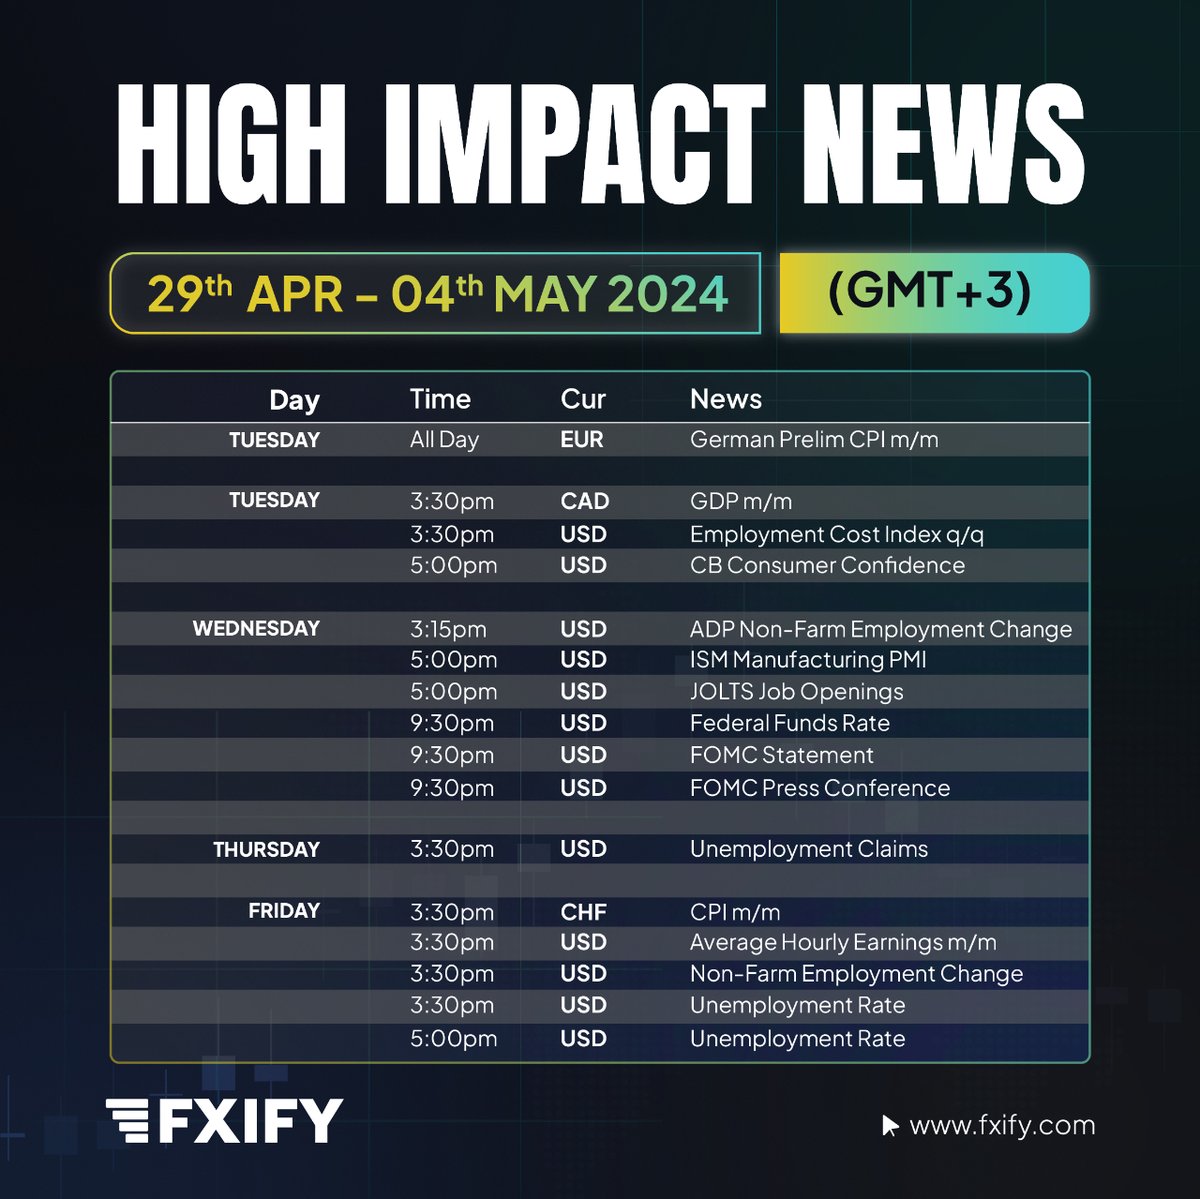 Heads up, traders! This week's economic calendar is loaded with high-impact releases. Stay informed to navigate potential market volatility. #FXIFY #HighImpactNews